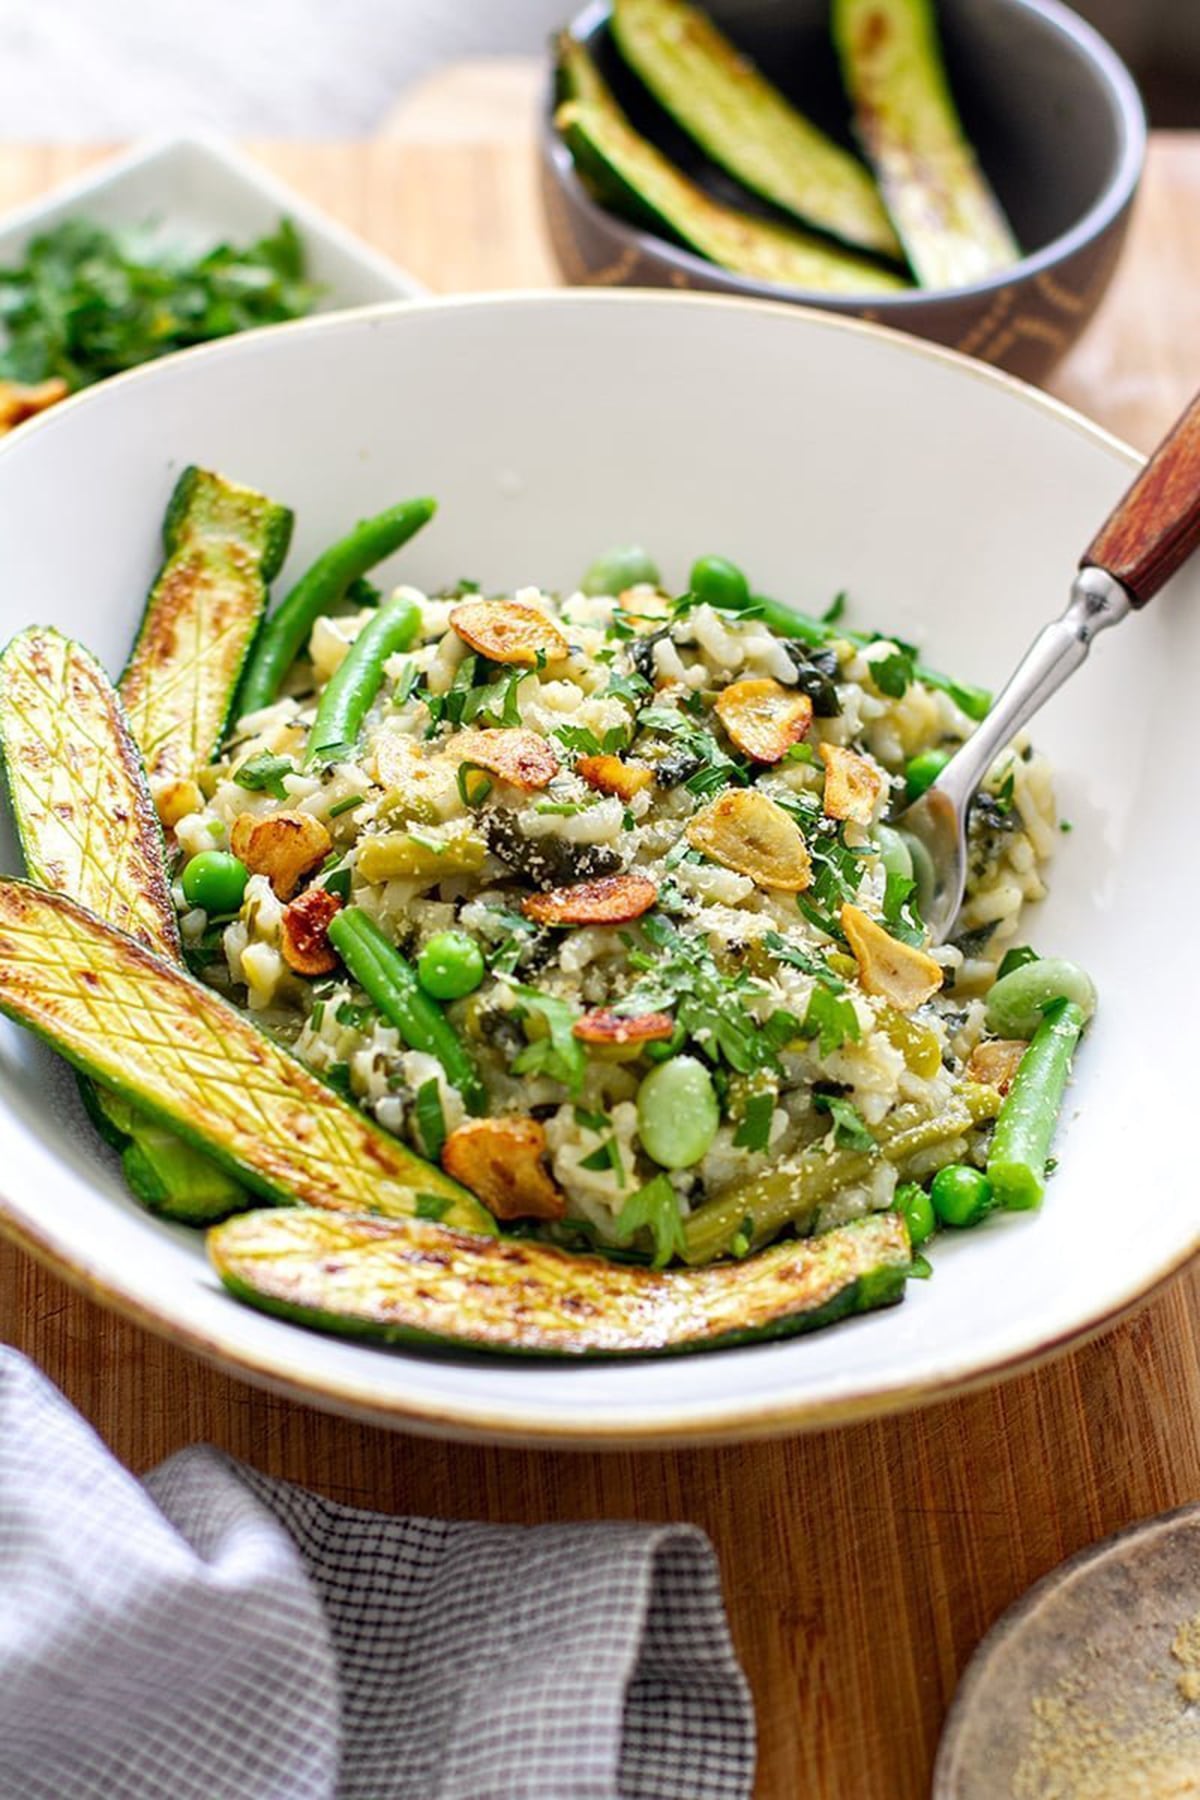 INSTANT POT VEGAN RISOTTO WITH GREEN VEGGIES & FRIED GARLIC